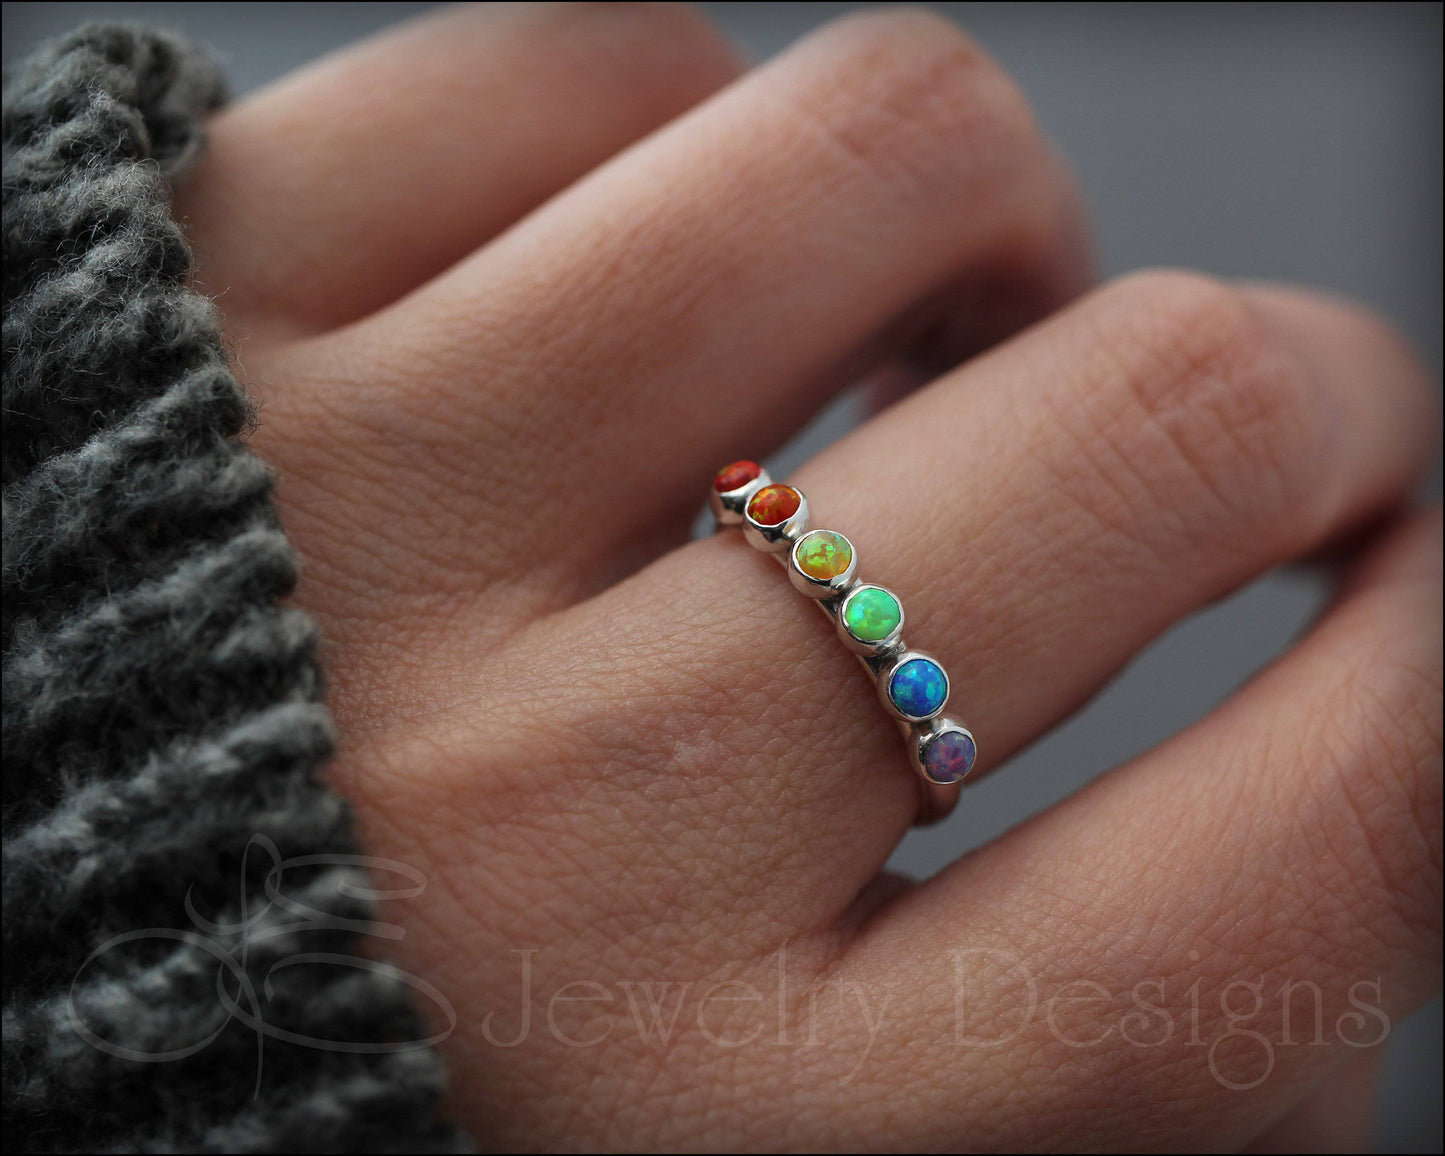 Multi Opal Ring - (choose # of opals) - LE Jewelry Designs